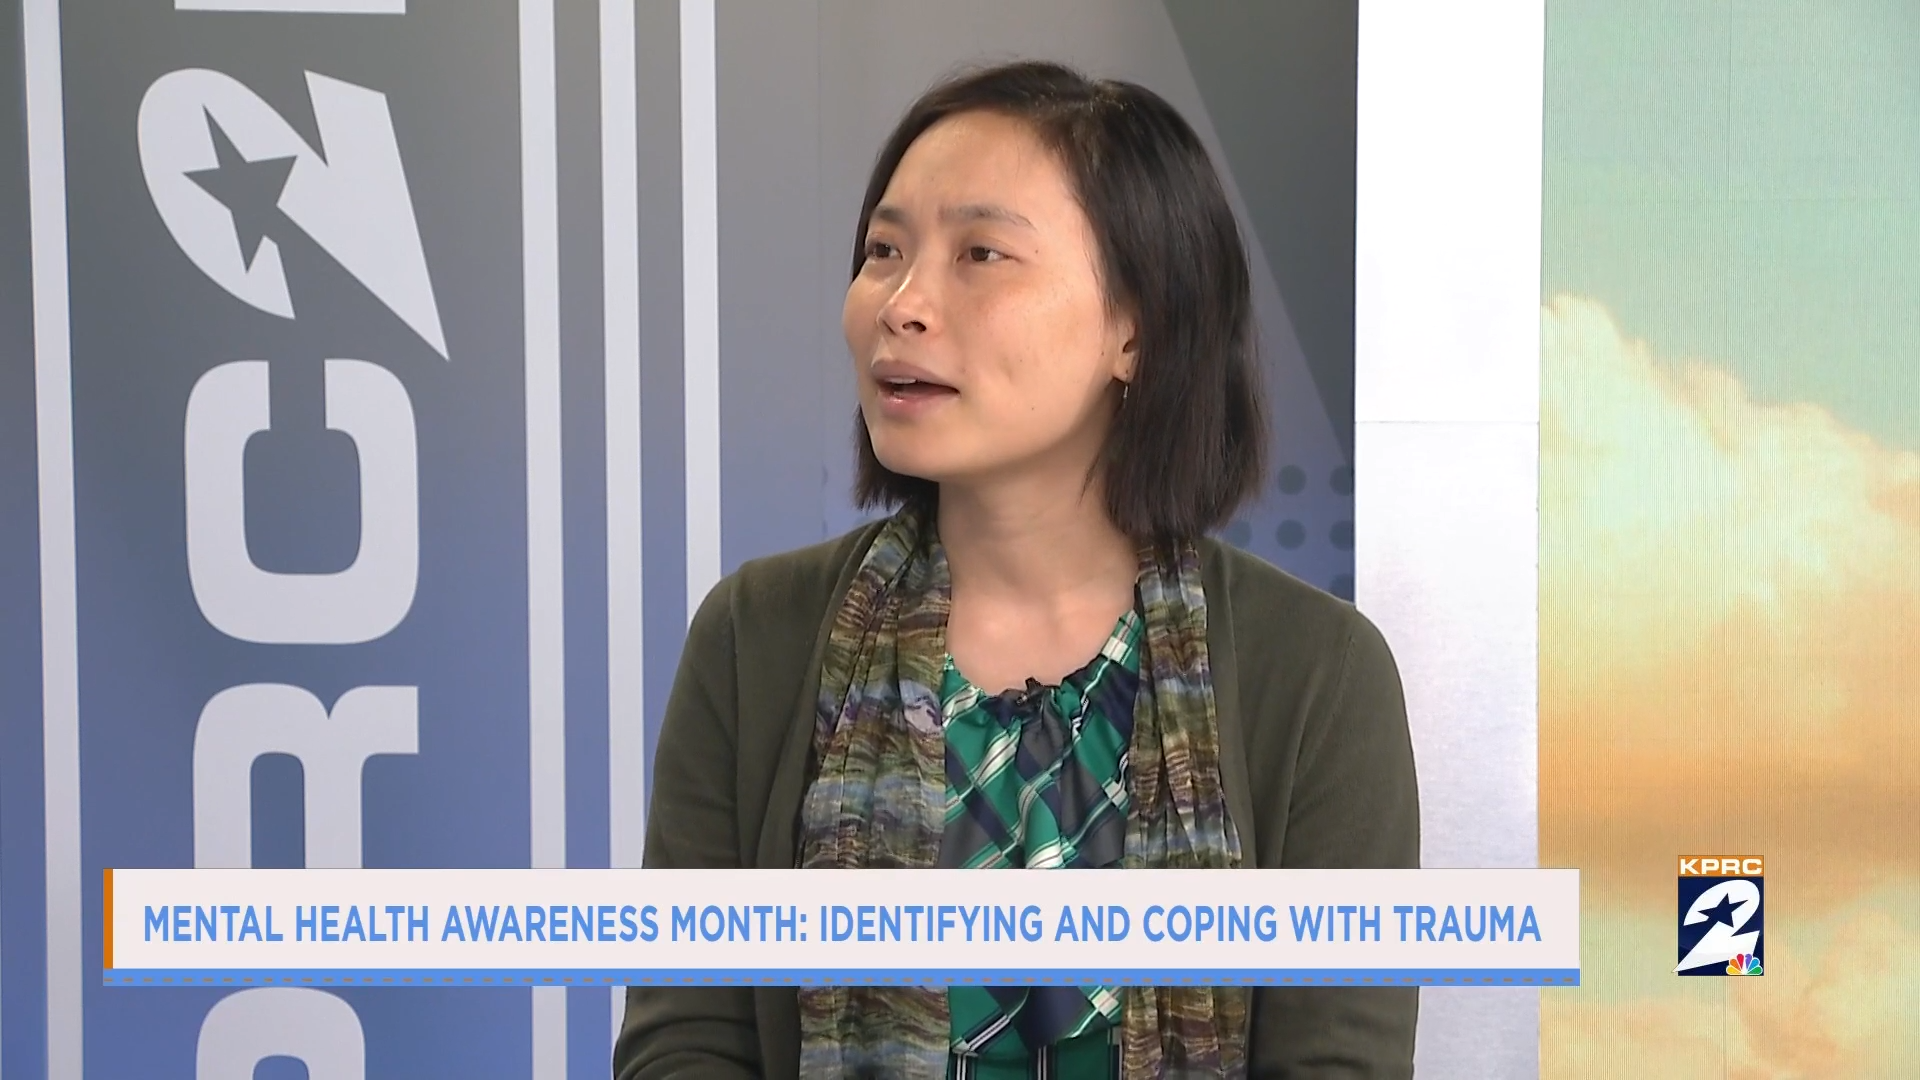 Dr. Luming Li, Chief Medical Officer of The Harris Center for Mental Health and IDD, shares the different types of trauma people can experience and effective strategies for coping with it.